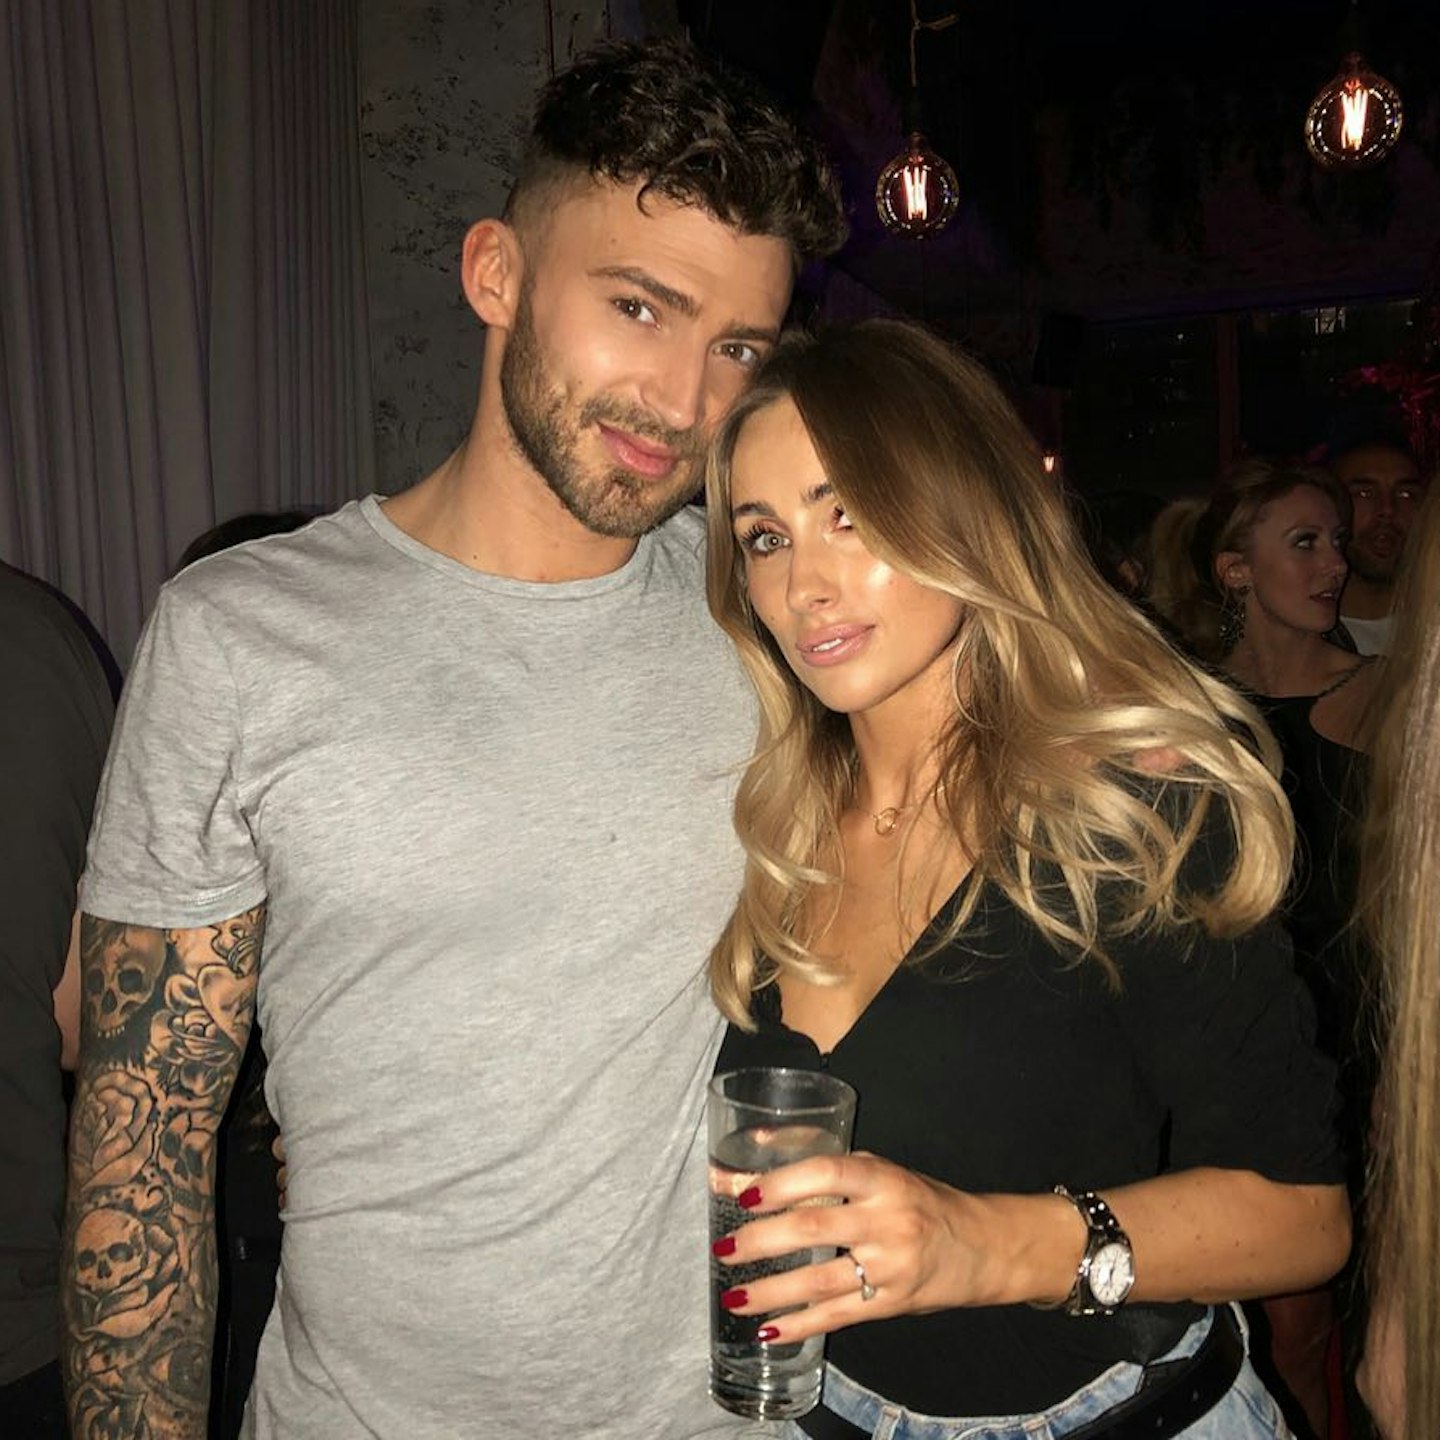 Jake Quickenden and Danielle Fogarty